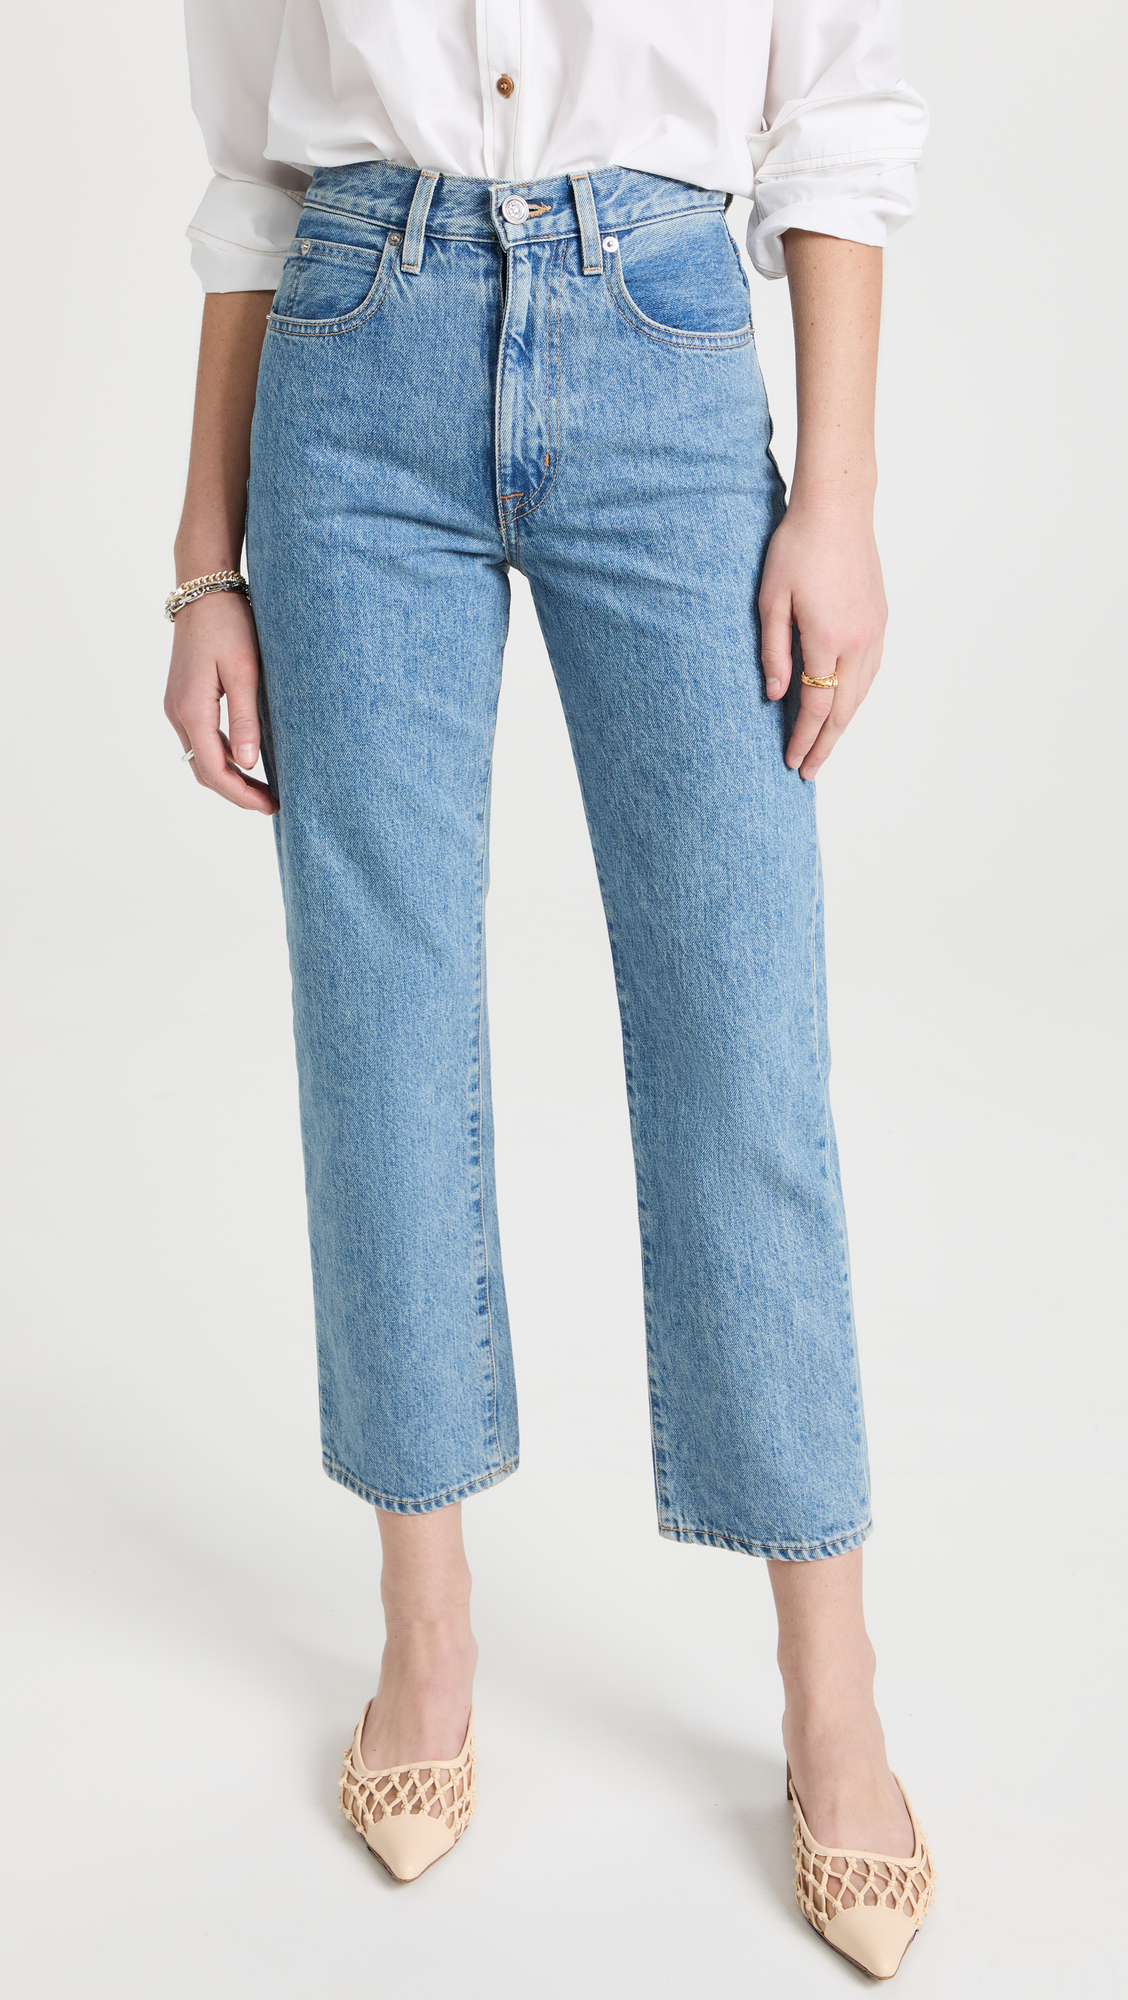 15 Pairs of Jeans We're Splurging On vs. 15 We're Saving On | Who What Wear